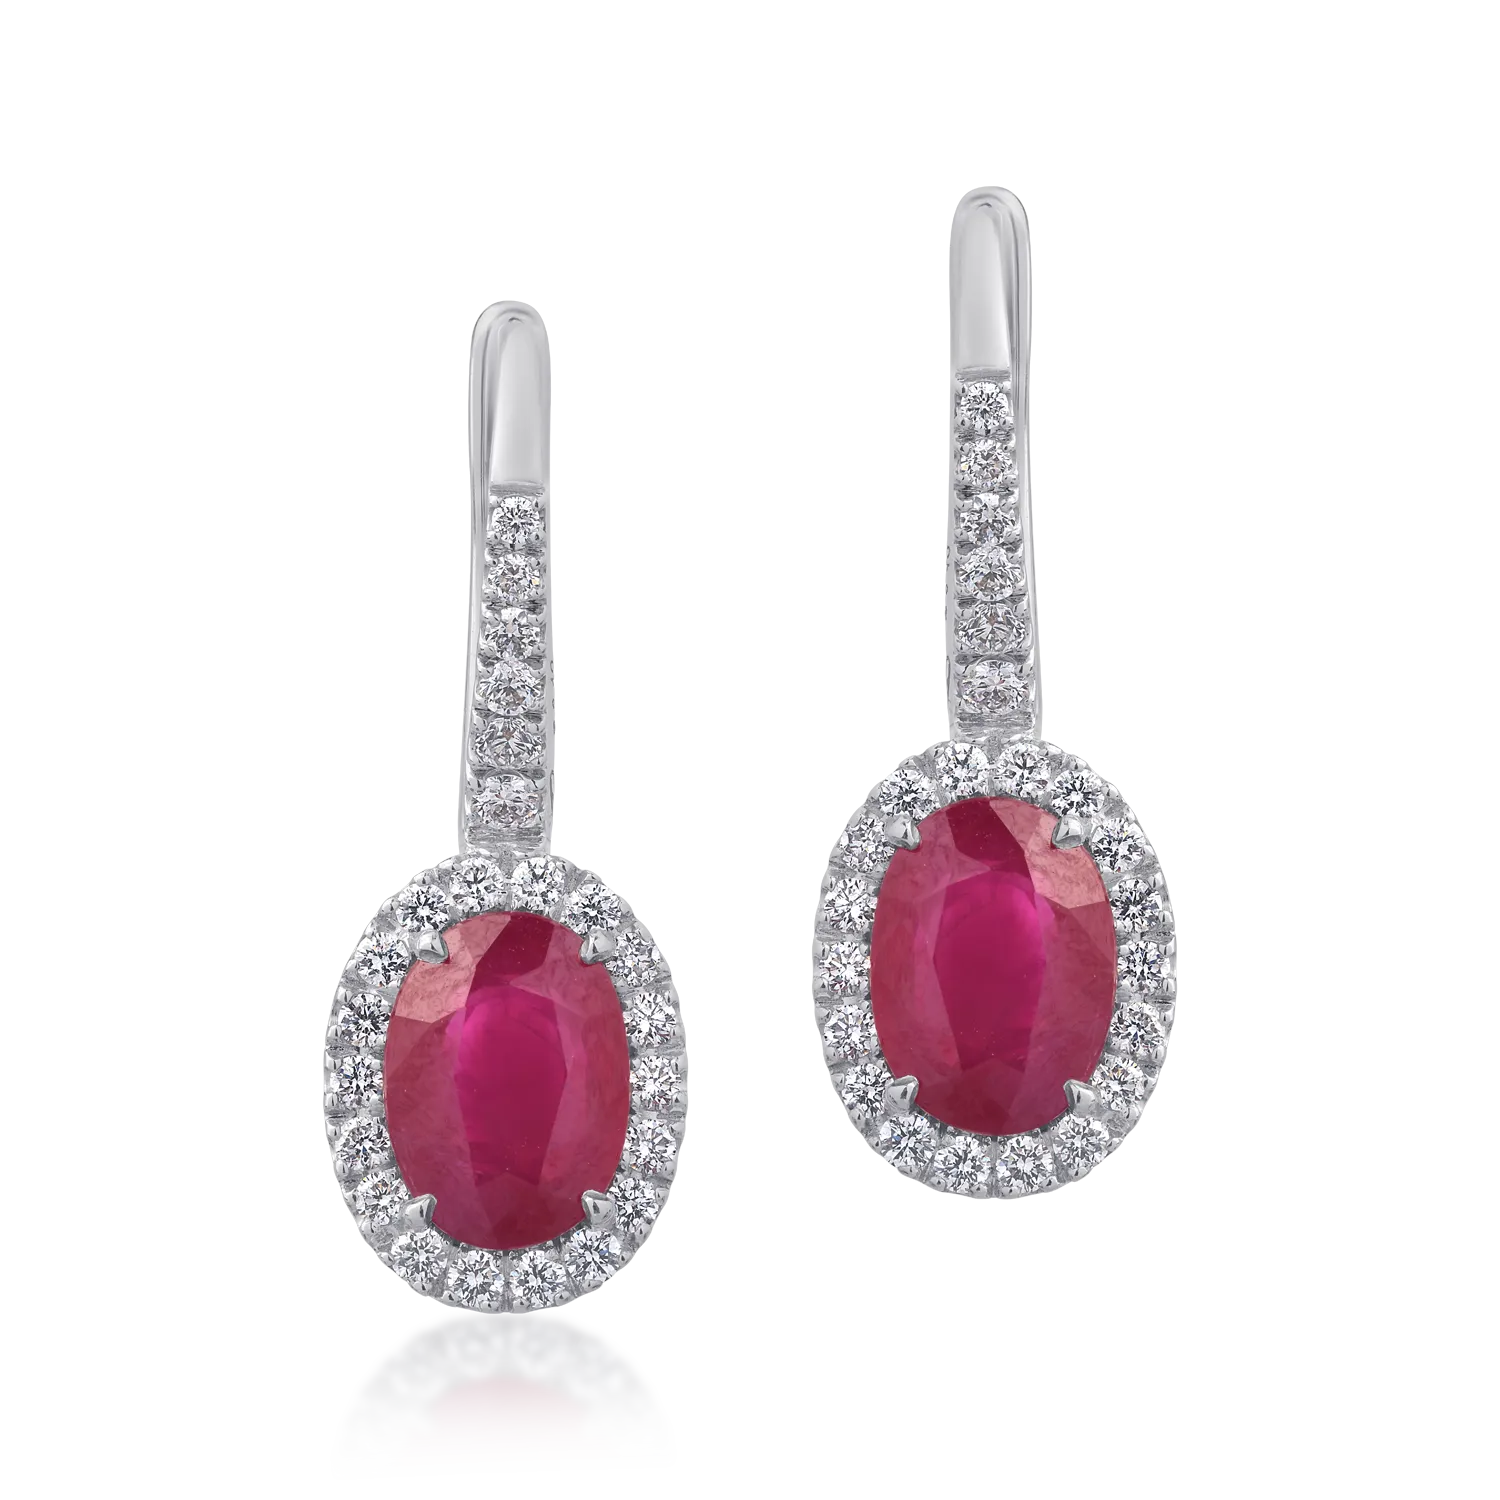 18K white gold earrings with 3.12ct rubies and 0.46ct diamonds